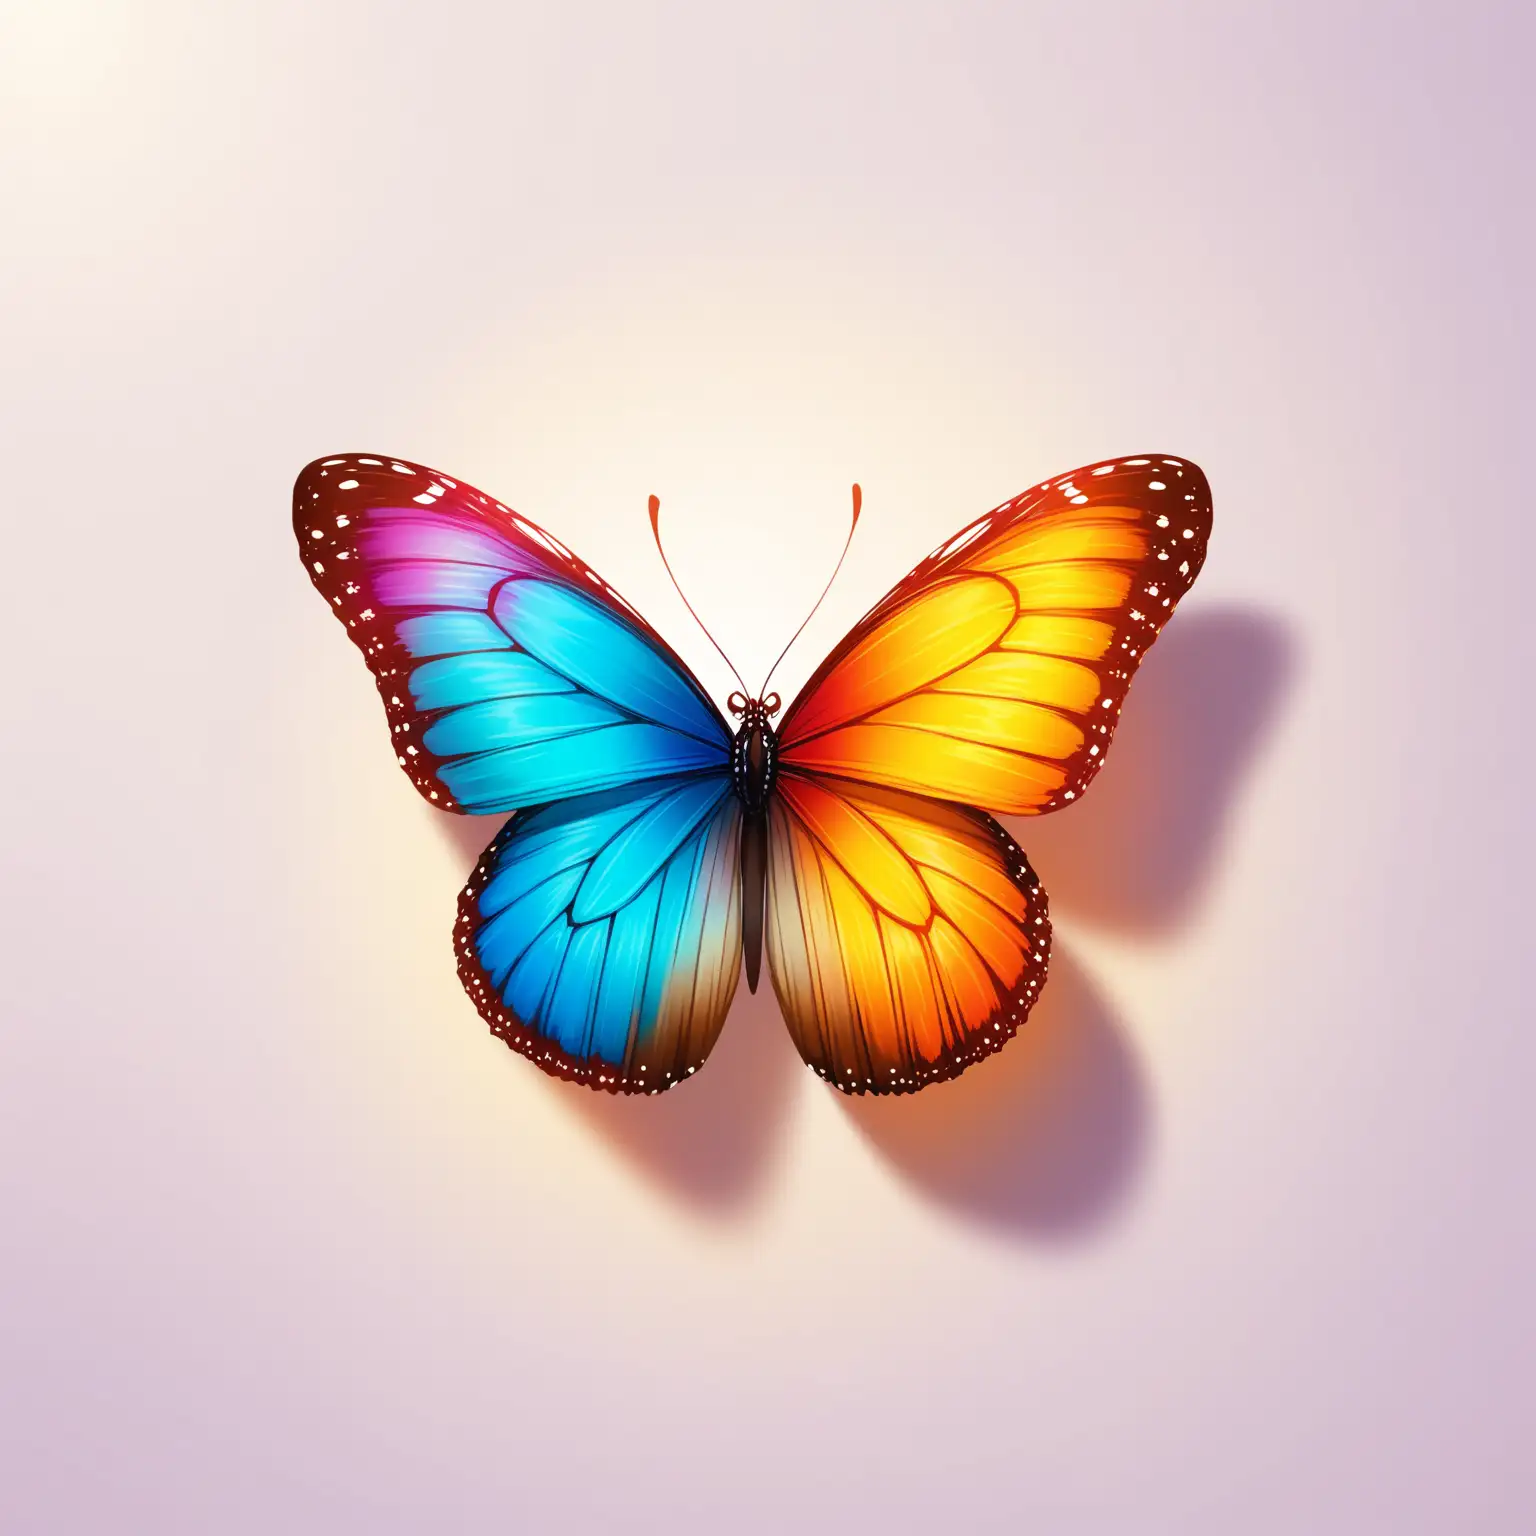 Vibrant Colorful Butterflies on Blank Background